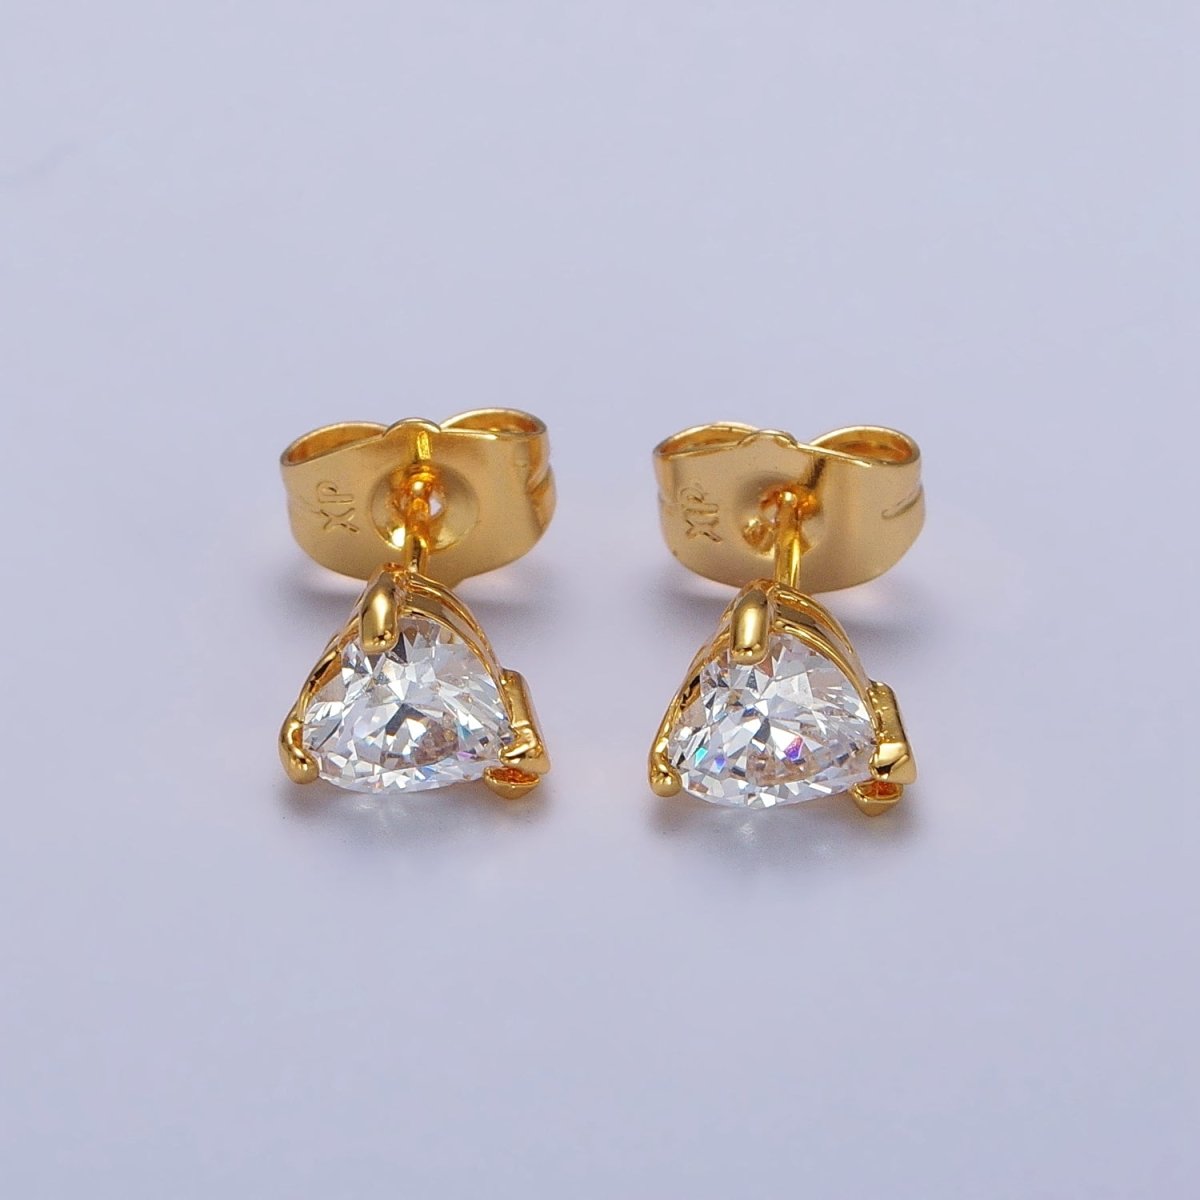 4mm, 5mm, 7mm, 8mm Clear Heart CZ Gold Stud Earrings | AB083 - AB088 - DLUXCA